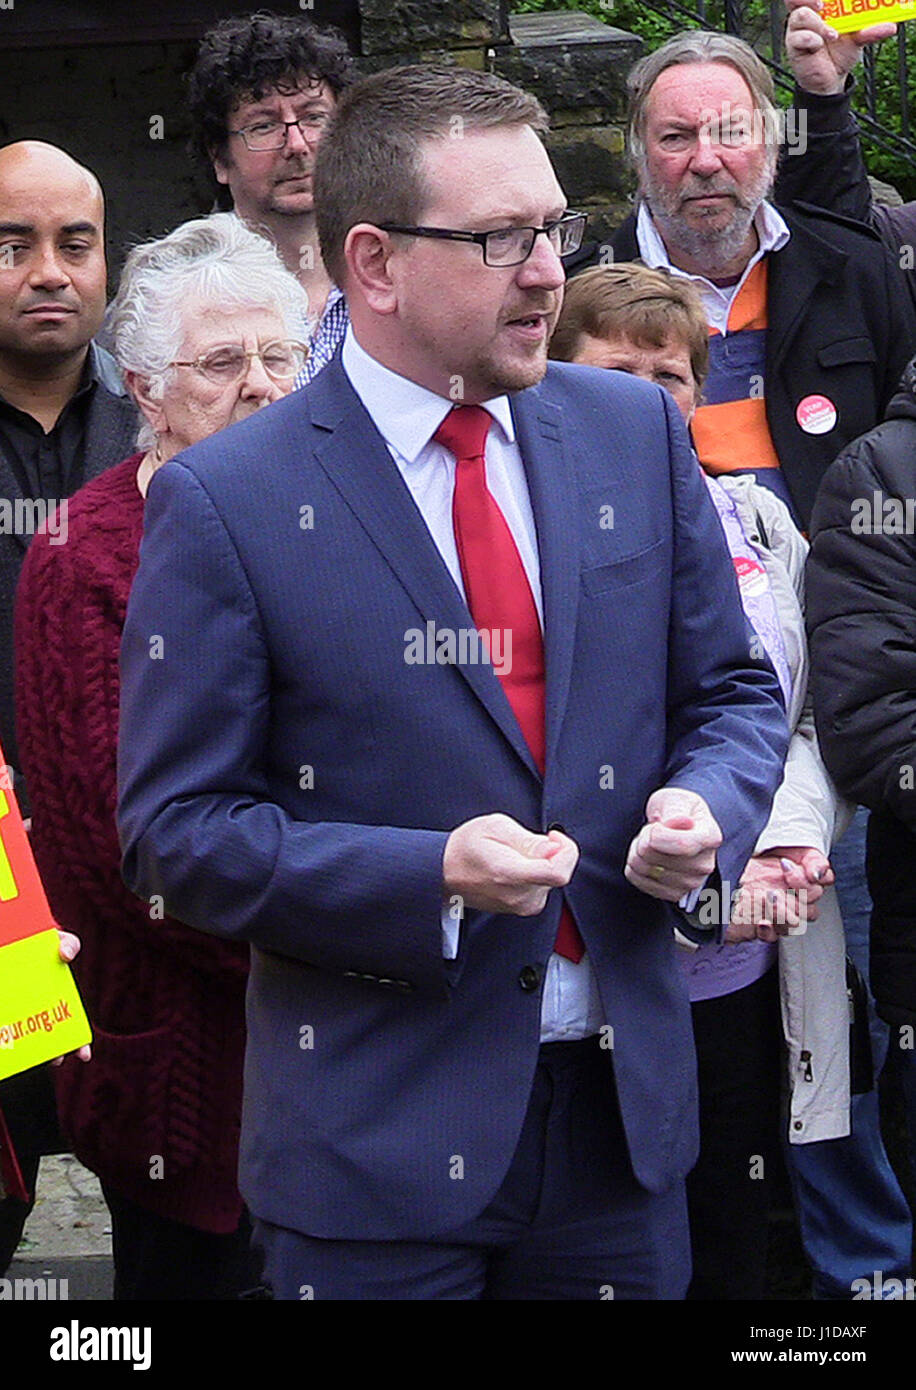 Andrew Gwynne, Labour's national election campaigns coodinator, campaigning in Morley, West Yorkshire, where he said he does not know if Ed Balls will return to fight in the West Yorkshire seat he lost two years ago in one of the defining moments of party's 2015 poll defeat. Stock Photo